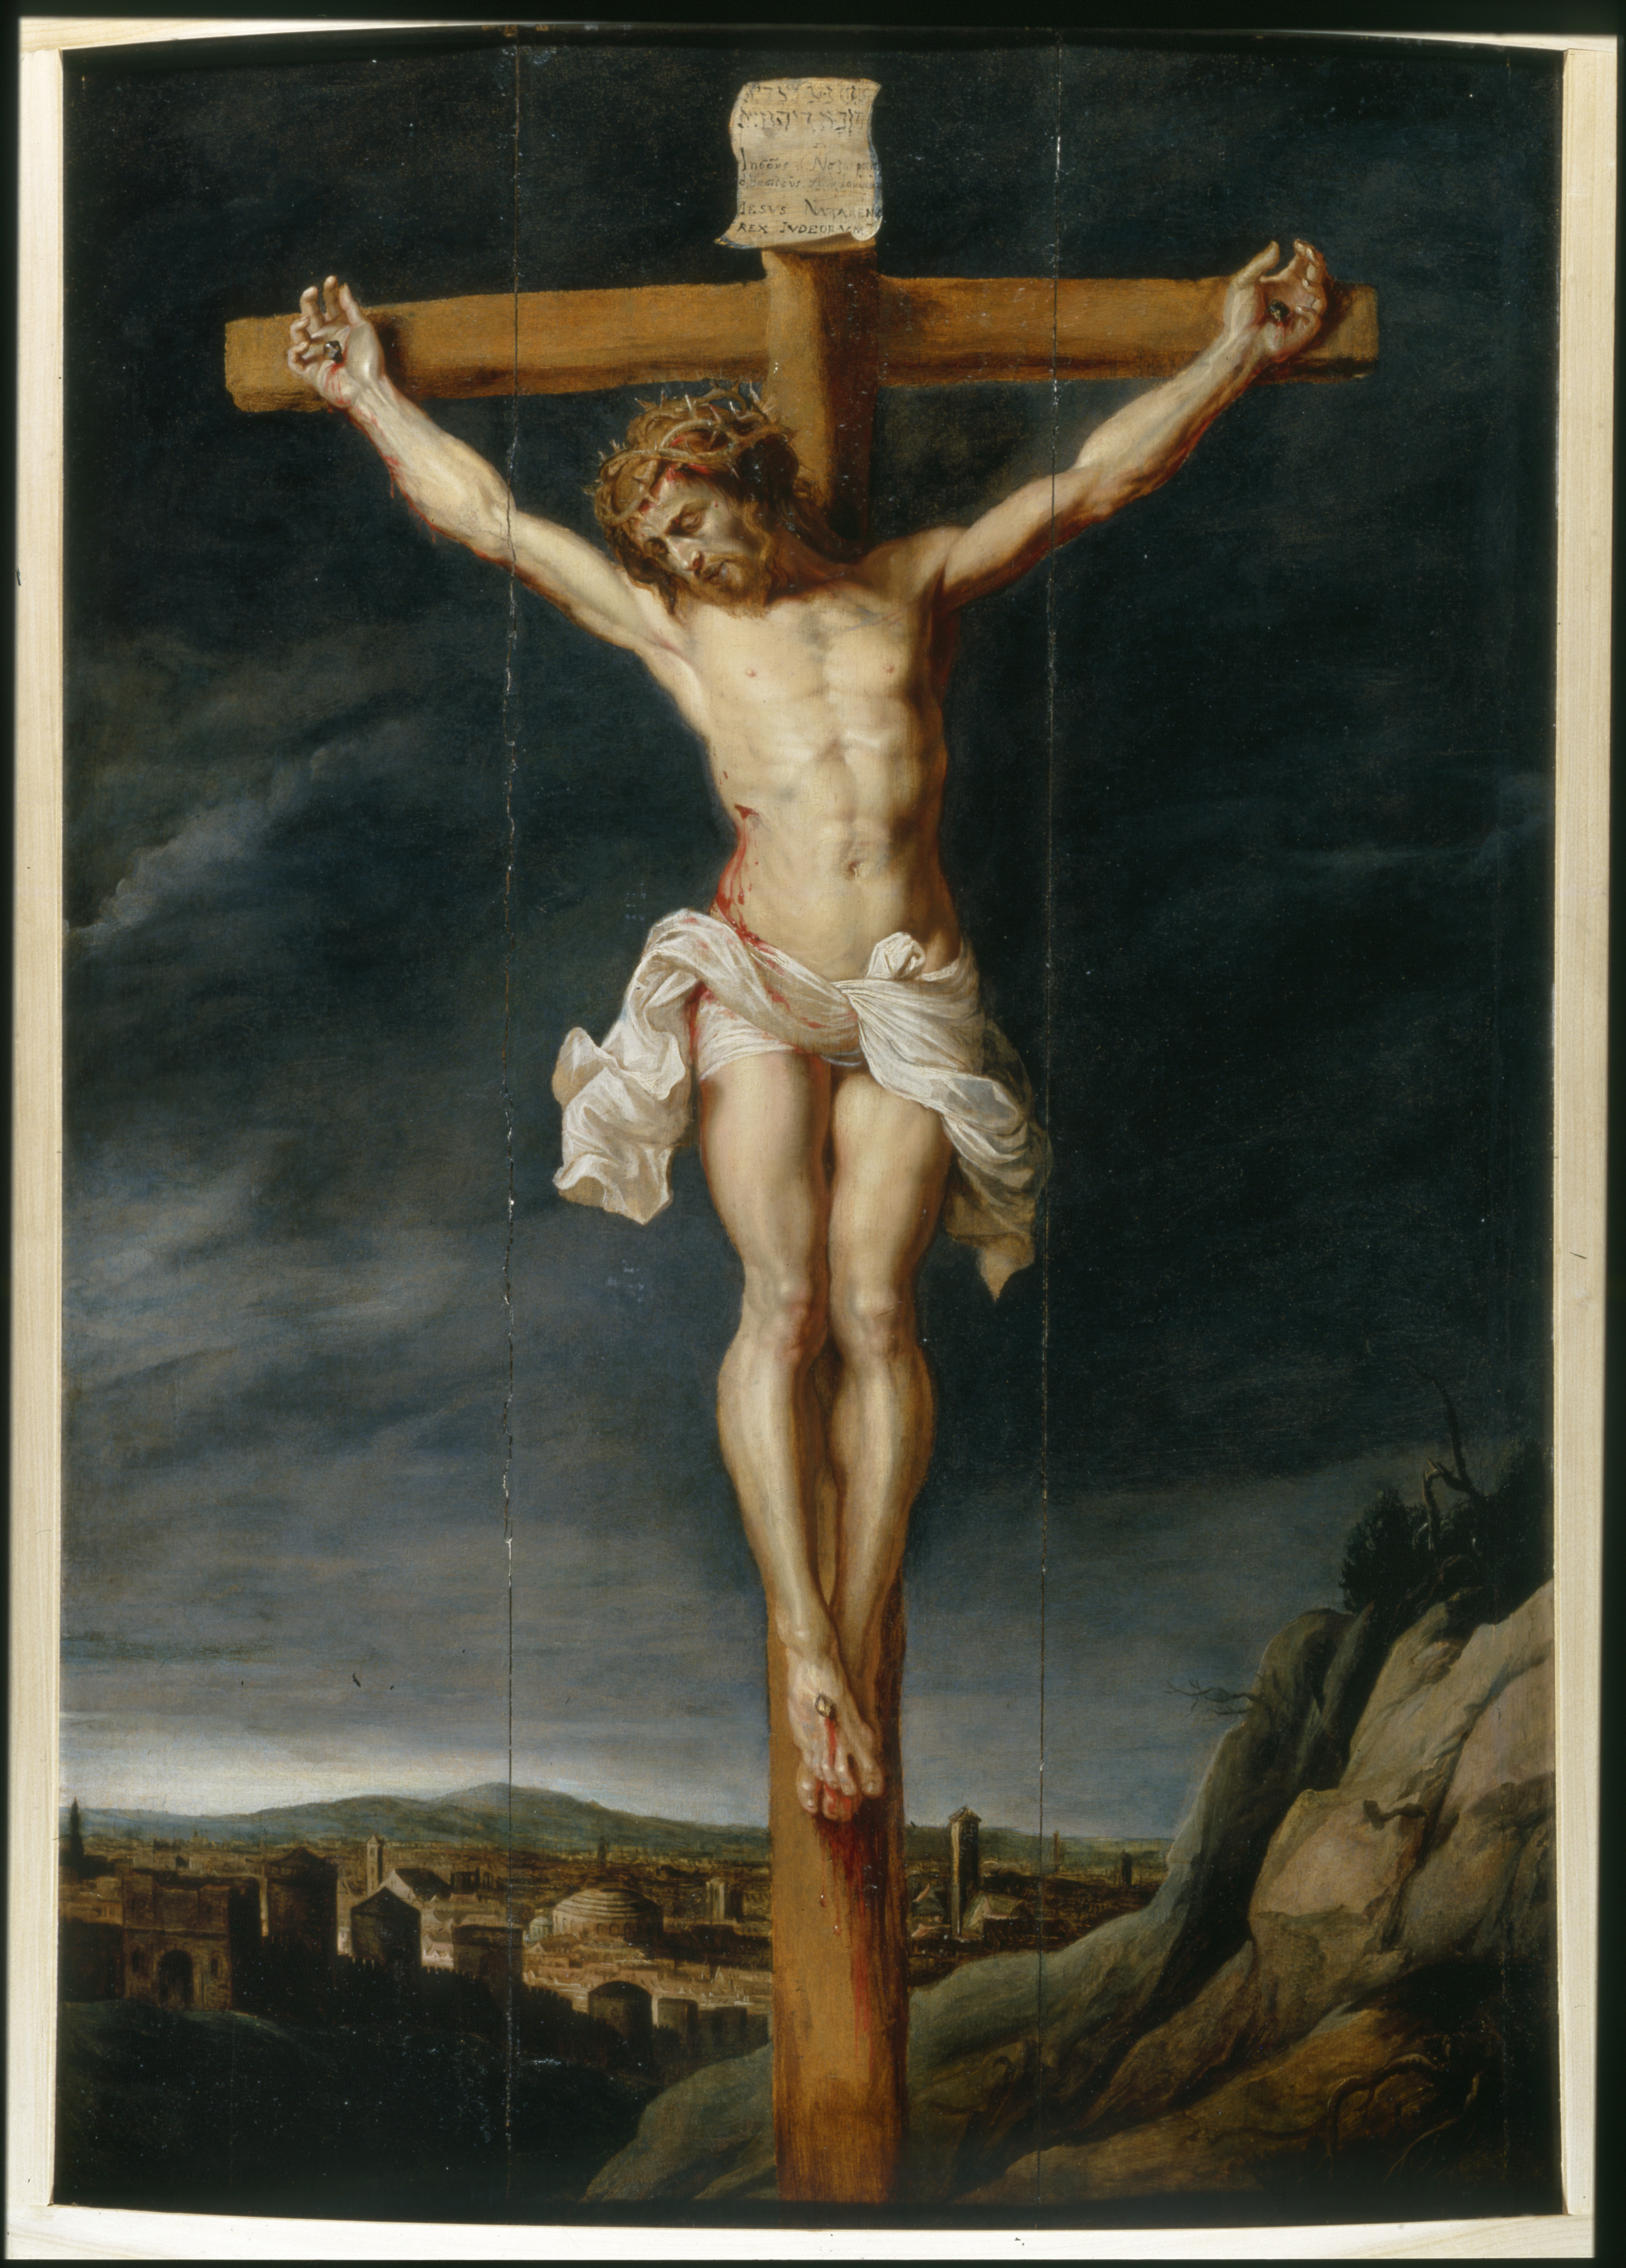 An image depicting a man with his hands and feet nailed to a wooden cross. The man wears a crown of thorns, and his head is tilted downward. On his body is a stab wound with blood pouring out onto the white cloth which is wrapped along his waist.